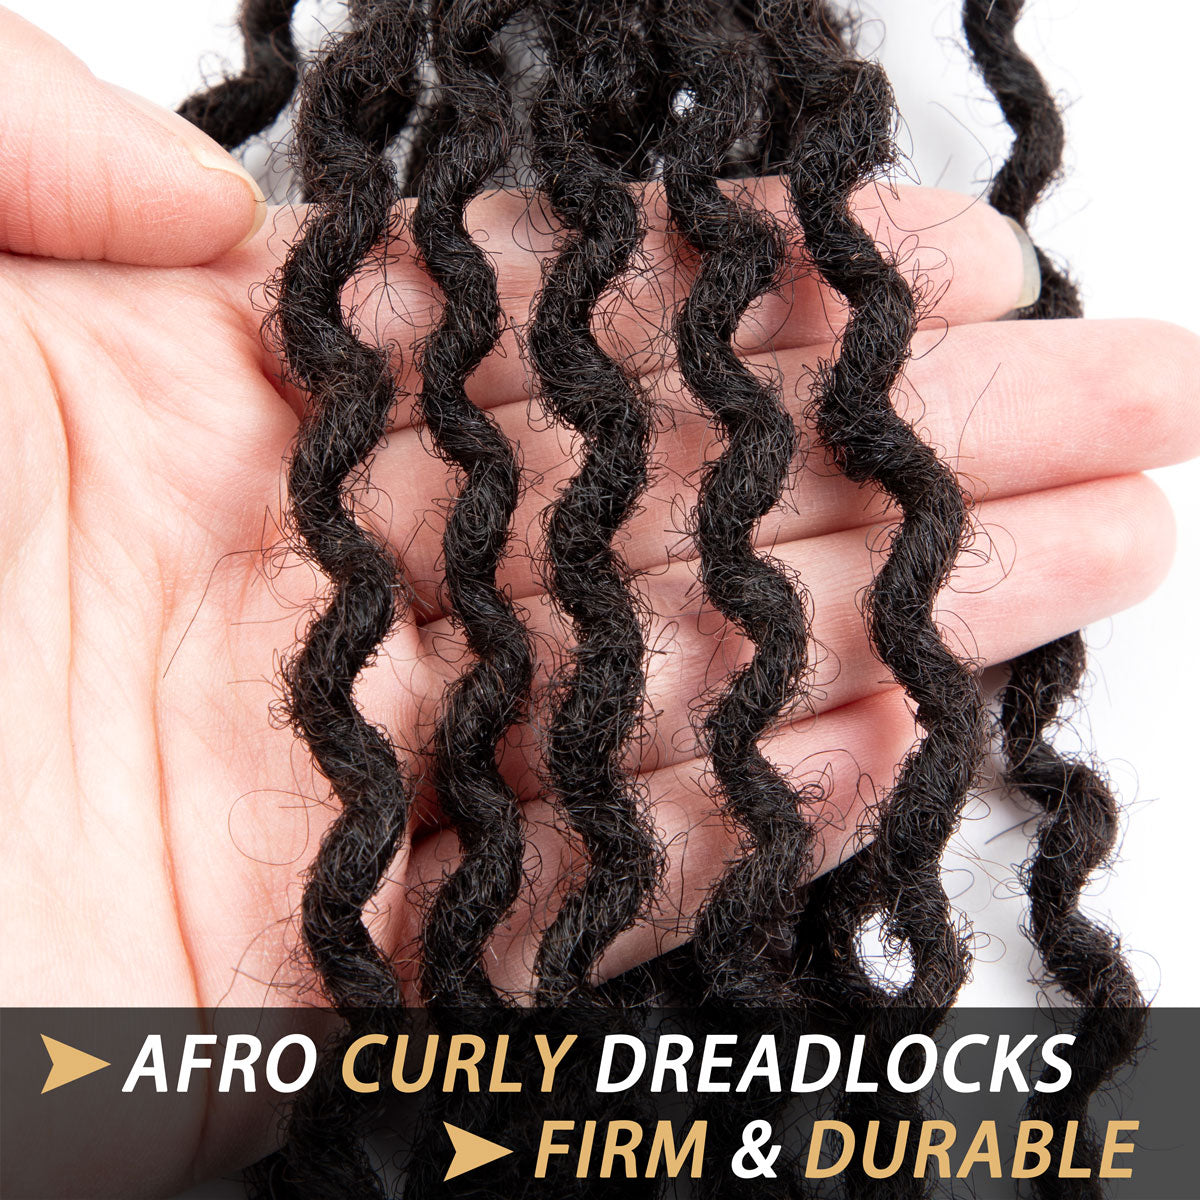 Curly Wave Dreadlocks Extensions Afro Human Hair Locs For Men and Women 0.4cm Thickness